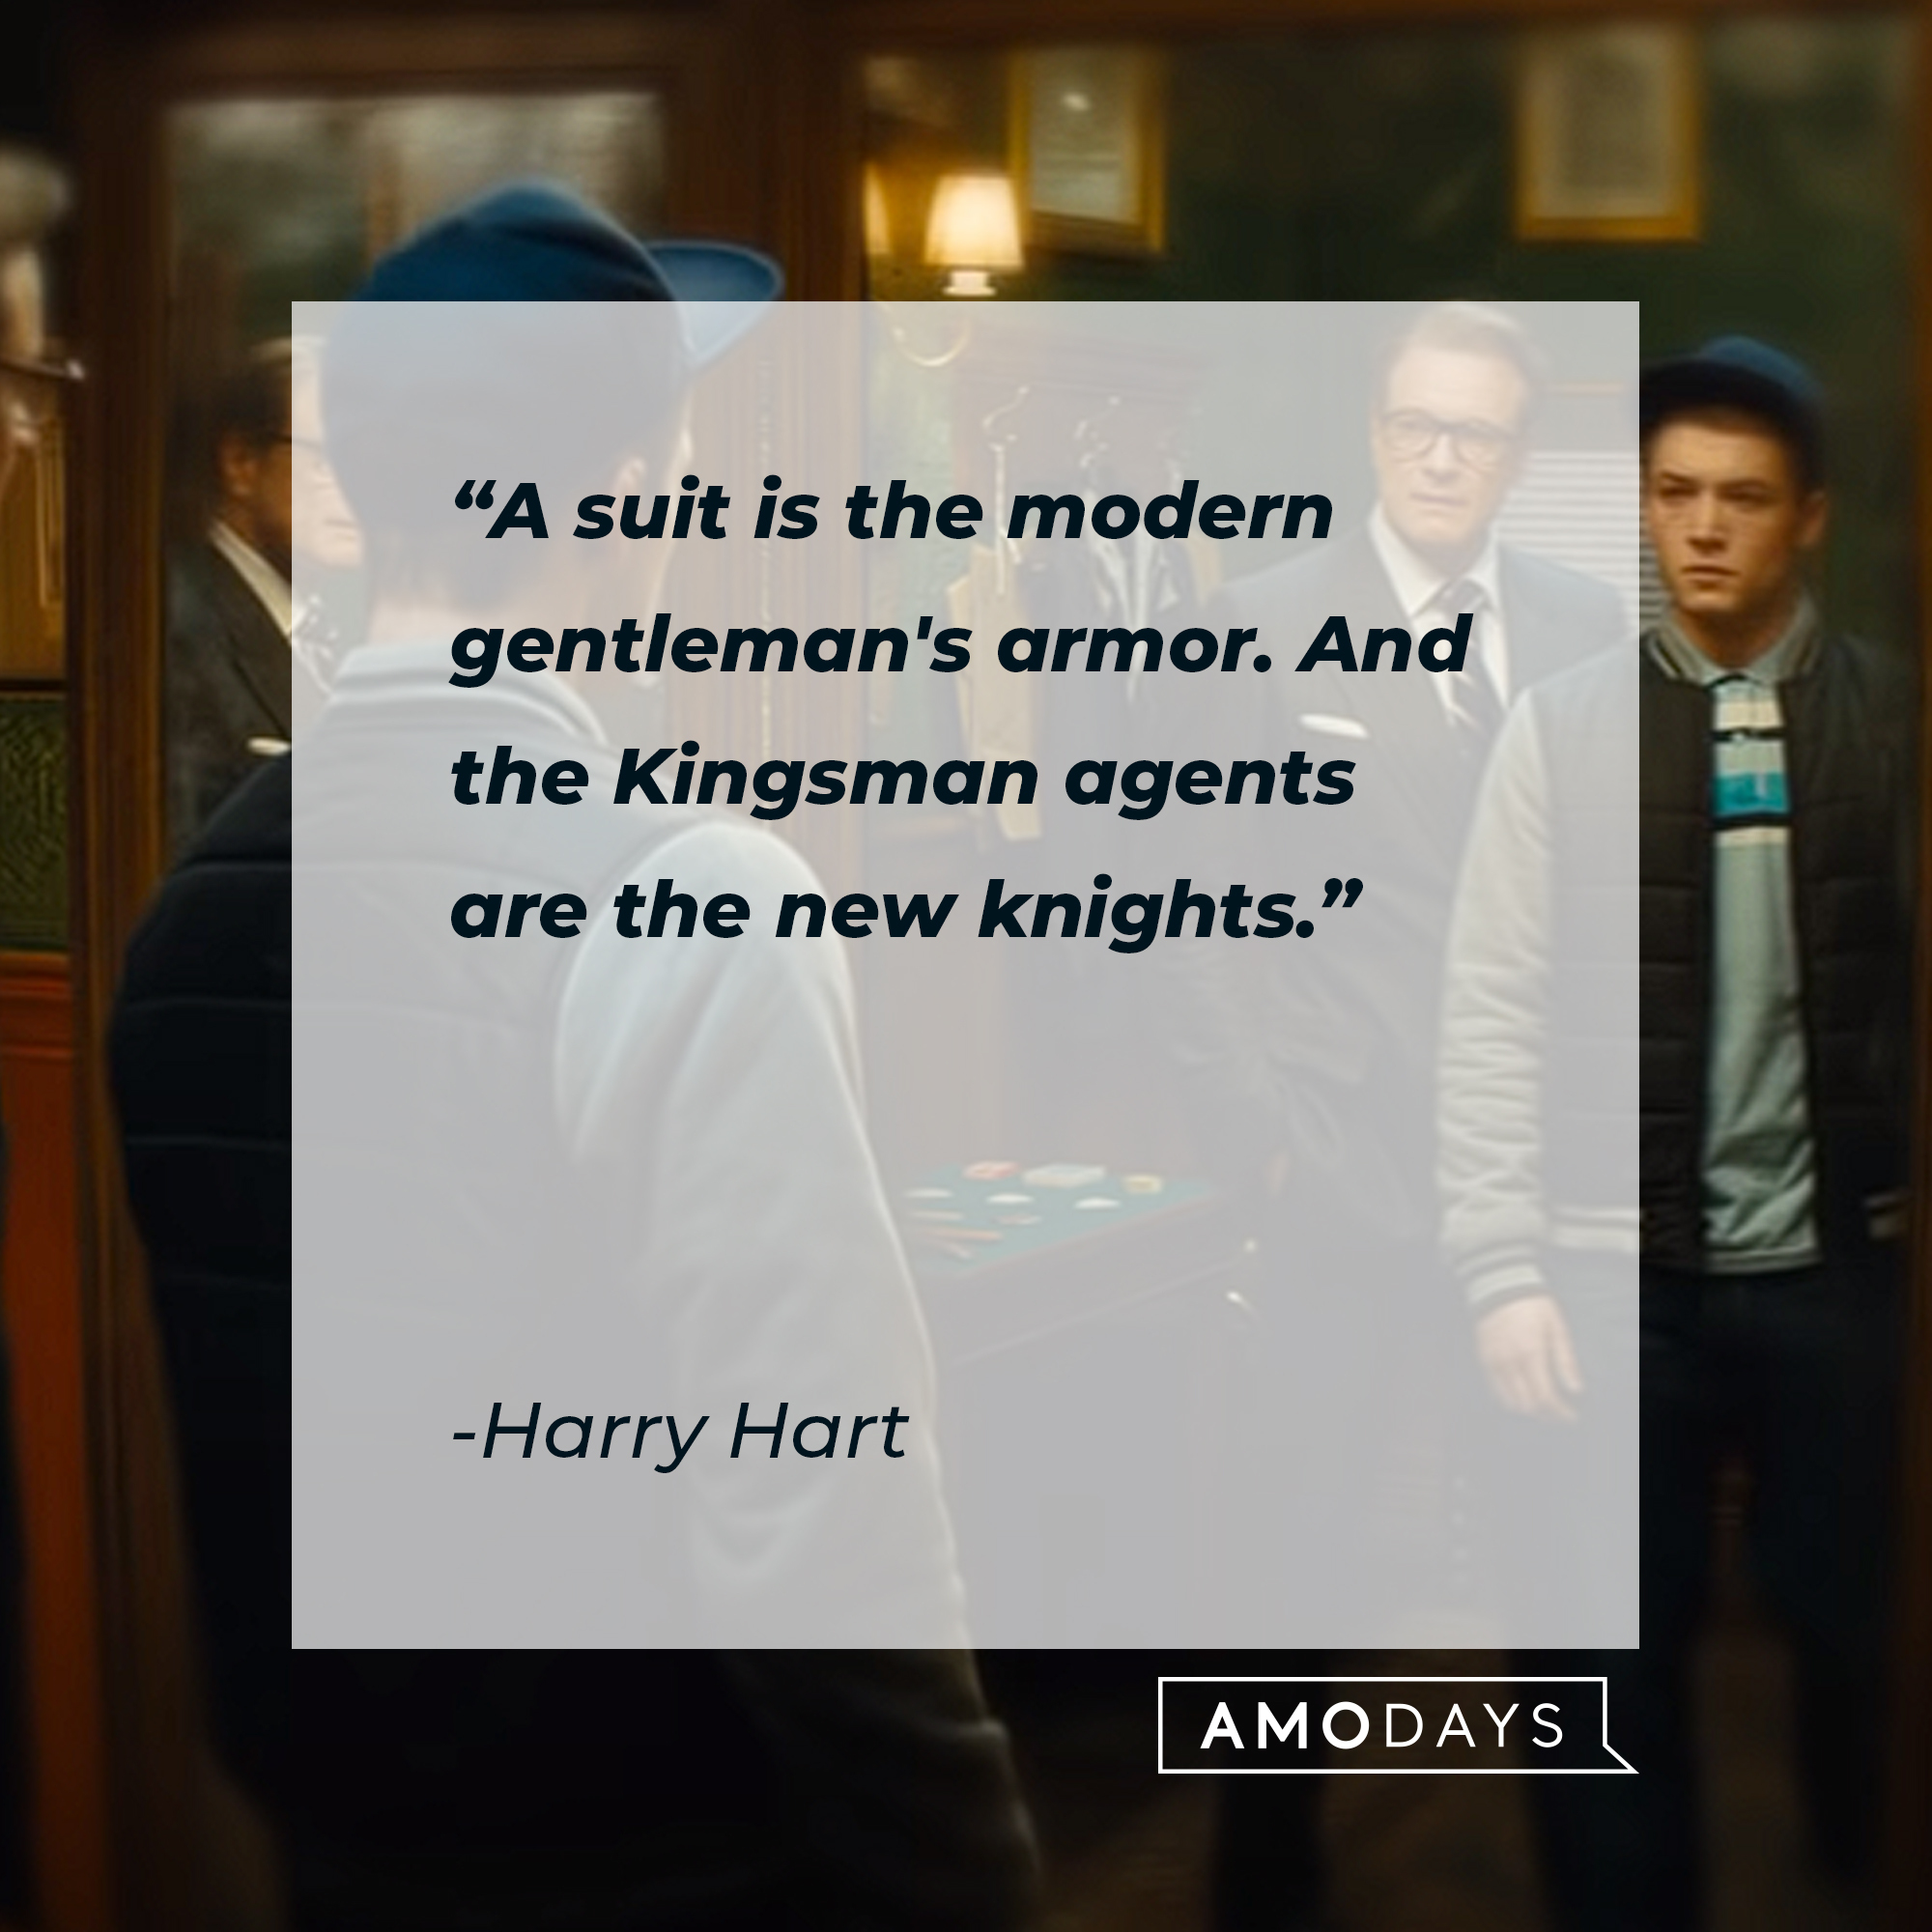 Harry Hart aka Galahad's quote: "A suit is the modern gentleman's armor. And the Kingsman agents are the new knights." | Image: YouTube / 20thCenturyStudios